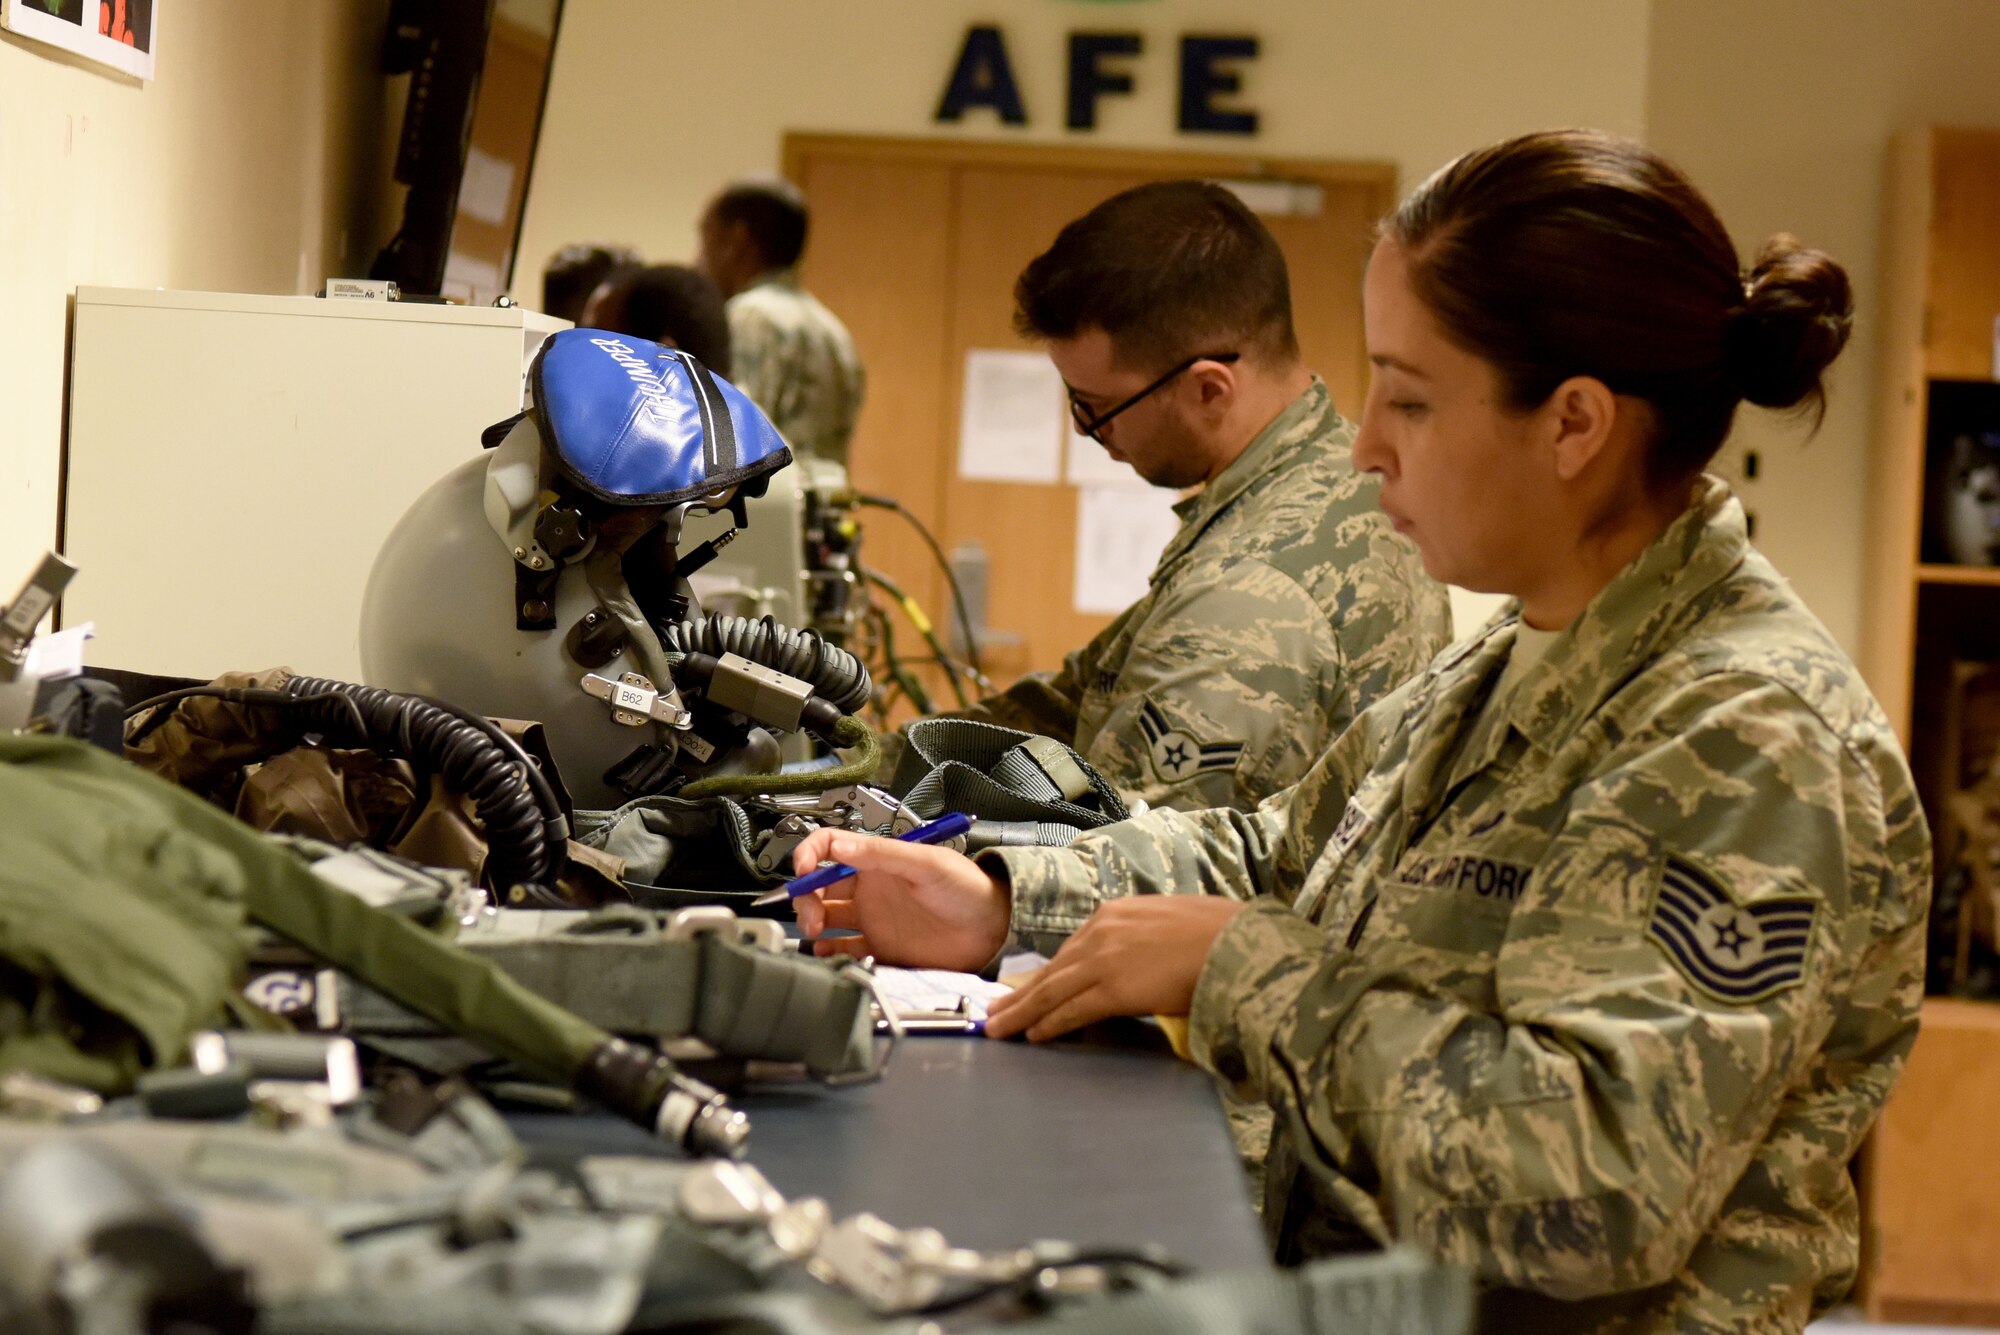 Airmen from the 48th Operation Support Squadron Aircrew Flight Equipment shop, prepare aircrew gear during a pre-flight/post-flight inspection at Royal Air Force Lakenheath, England, Sept. 13, 2018. Acute attention to detail by AFE technicians is essential to provide crews with the confidence they need to be able to operate. (U.S. Air Force photo/ Senior Airman John A. Crawford)